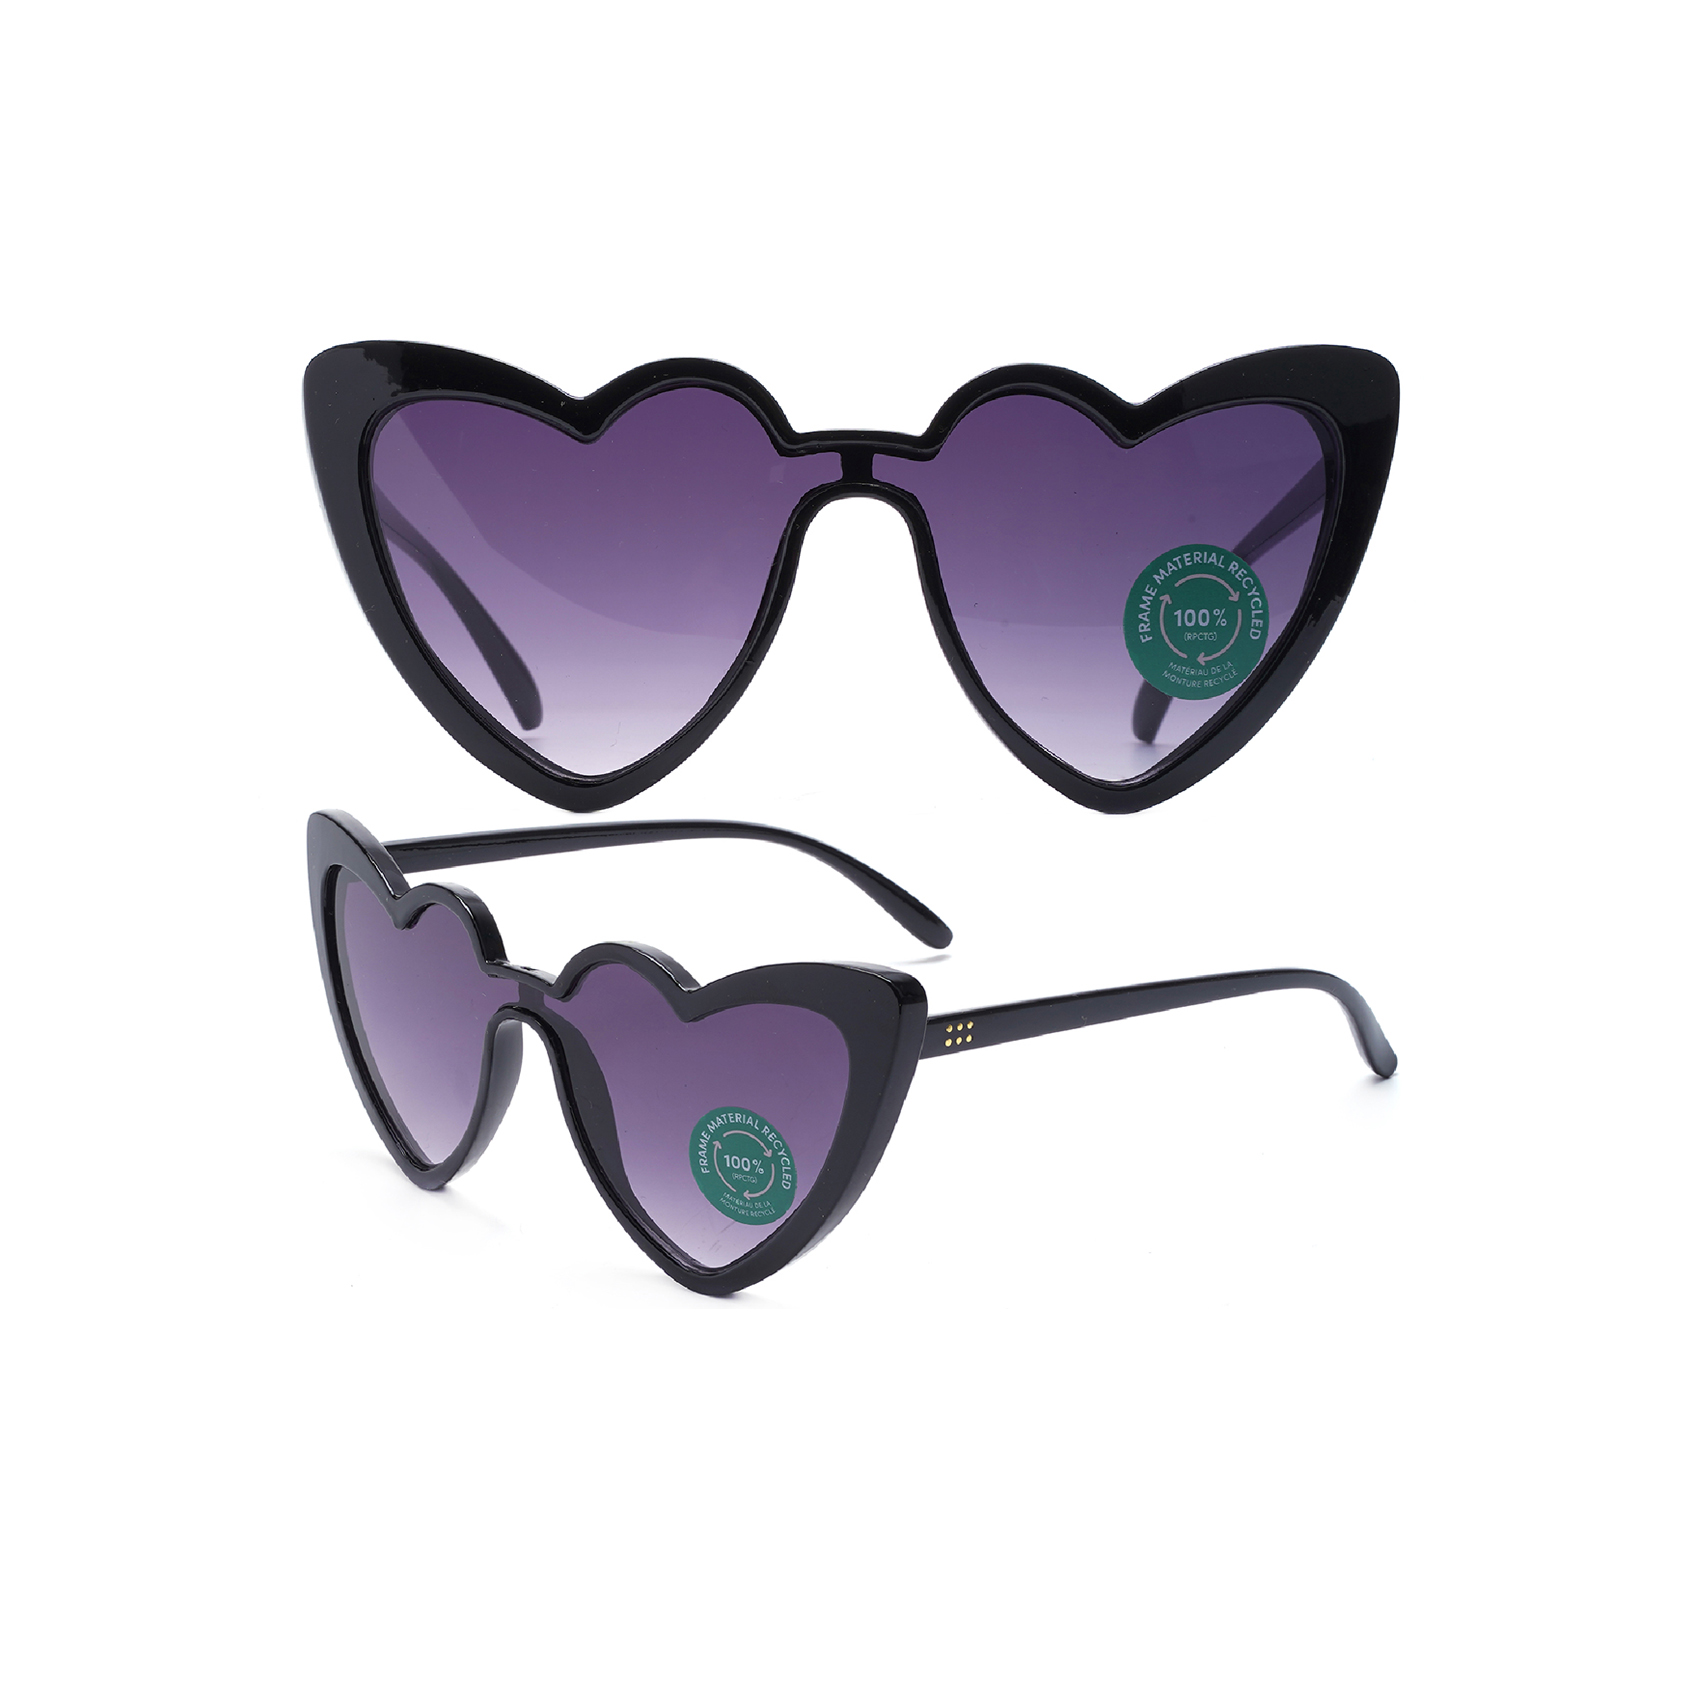 Black Lovely Heart Shape Sunglasses China Recycled Material Sunglasses Wholesale